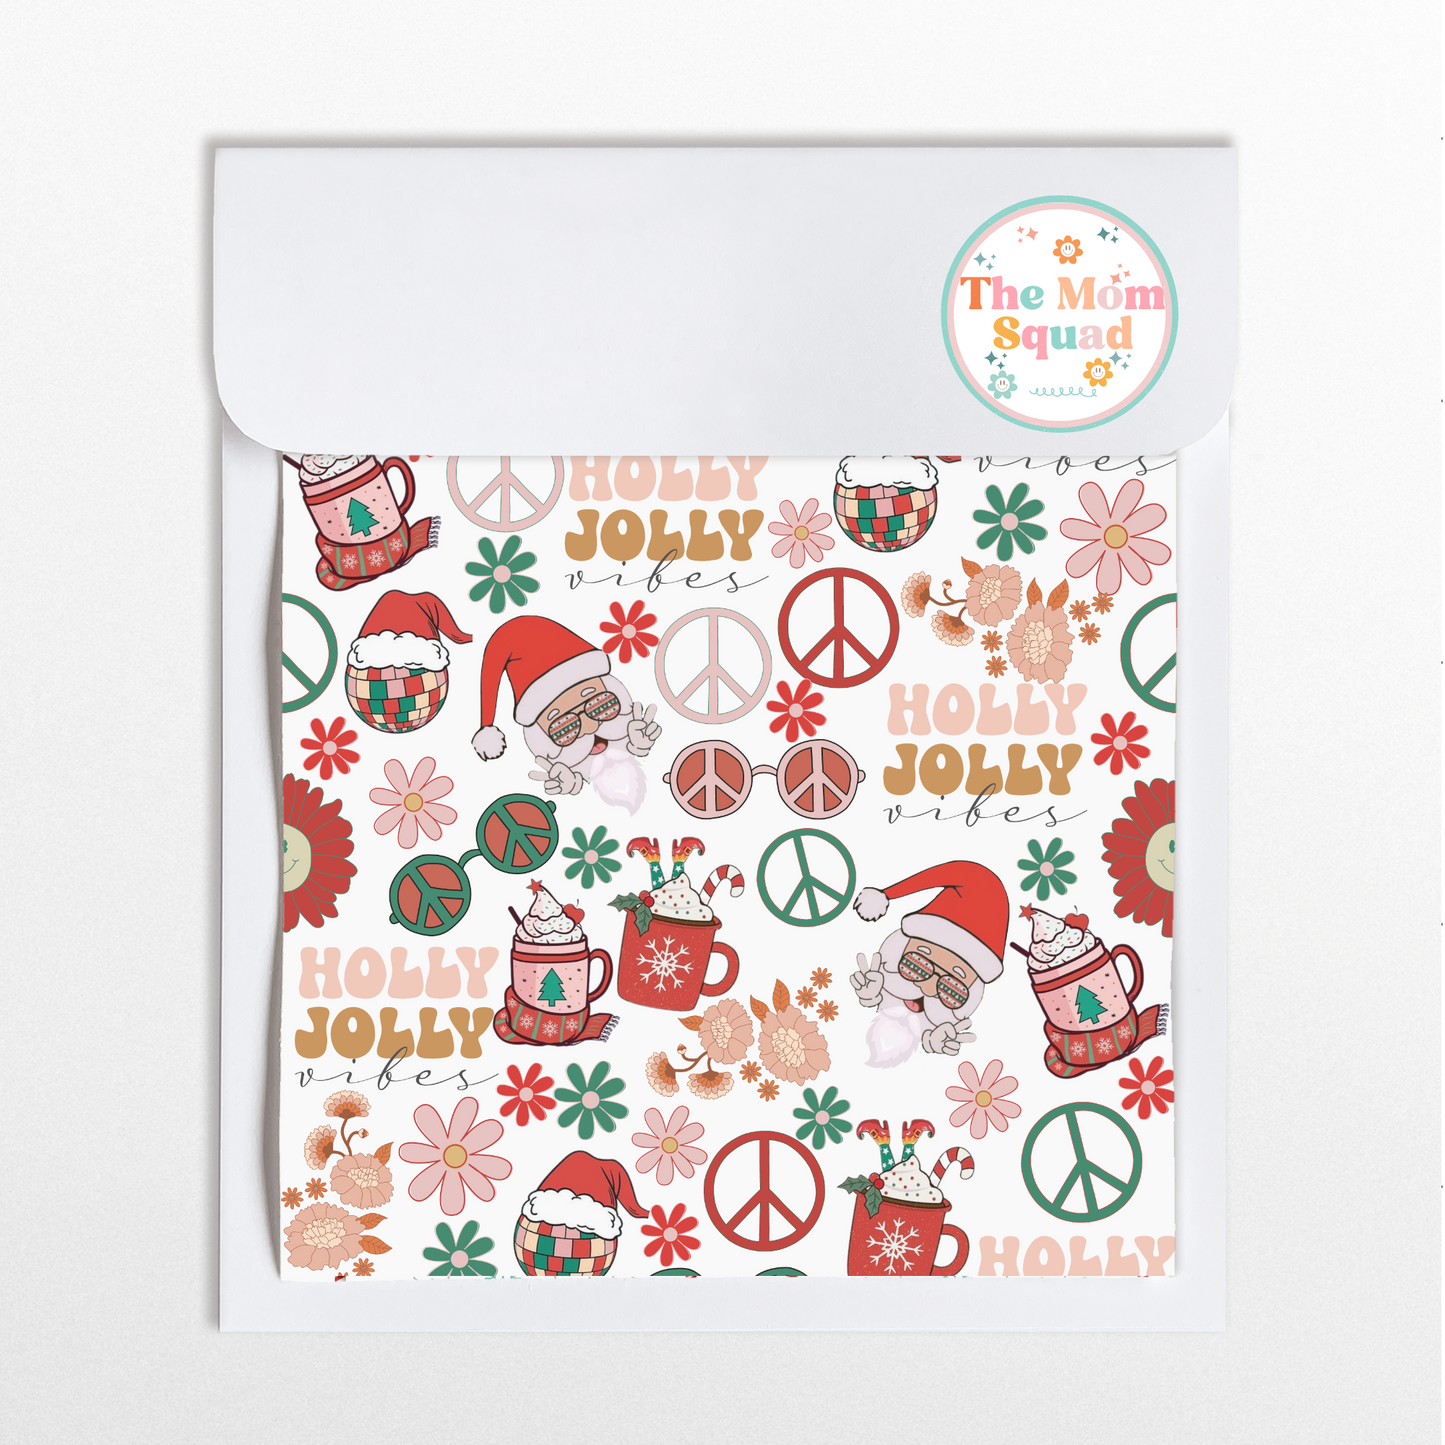 Groovy Hippie Santa Christmas Seamless Pattern – Infuse Your Holidays with Retro Vibes and Festive Cheer! Step Back in Time with Jolly Santa Claus, Peace Signs, and Far-Out Colors for a Funky and Fun Celebration!